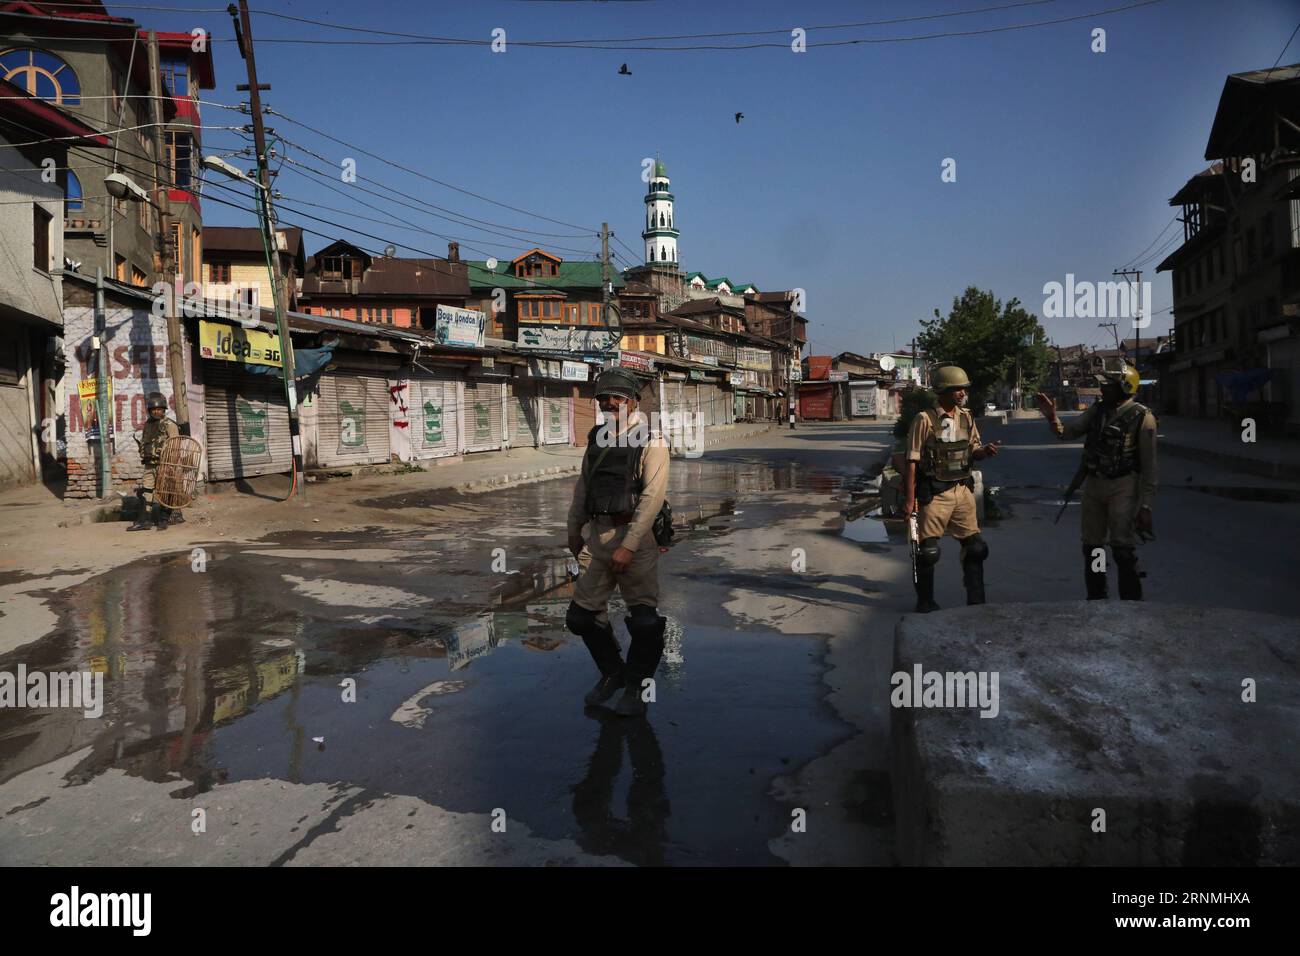 (170530) -- SRINAGAR, May 30, 2017 -- Indian paramilitary troopers stand guard at a market during curfew-like restrictions in downtown Srinagar, summer capital of Indian-controlled Kashmir, May 30, 2017. Curfew-like restrictions have been imposed in several areas of Srinagar to prevent protests and clashes. ) (zcc) KASHMIR-SRINAGAR-RESTRICTIONS JavedxDar PUBLICATIONxNOTxINxCHN   Srinagar May 30 2017 Indian paramilitary Troopers stand Guard AT a Market during Curfew Like Restrictions in Downtown Srinagar Summer Capital of Indian Controlled Kashmir May 30 2017 Curfew Like Restrictions have been Stock Photo